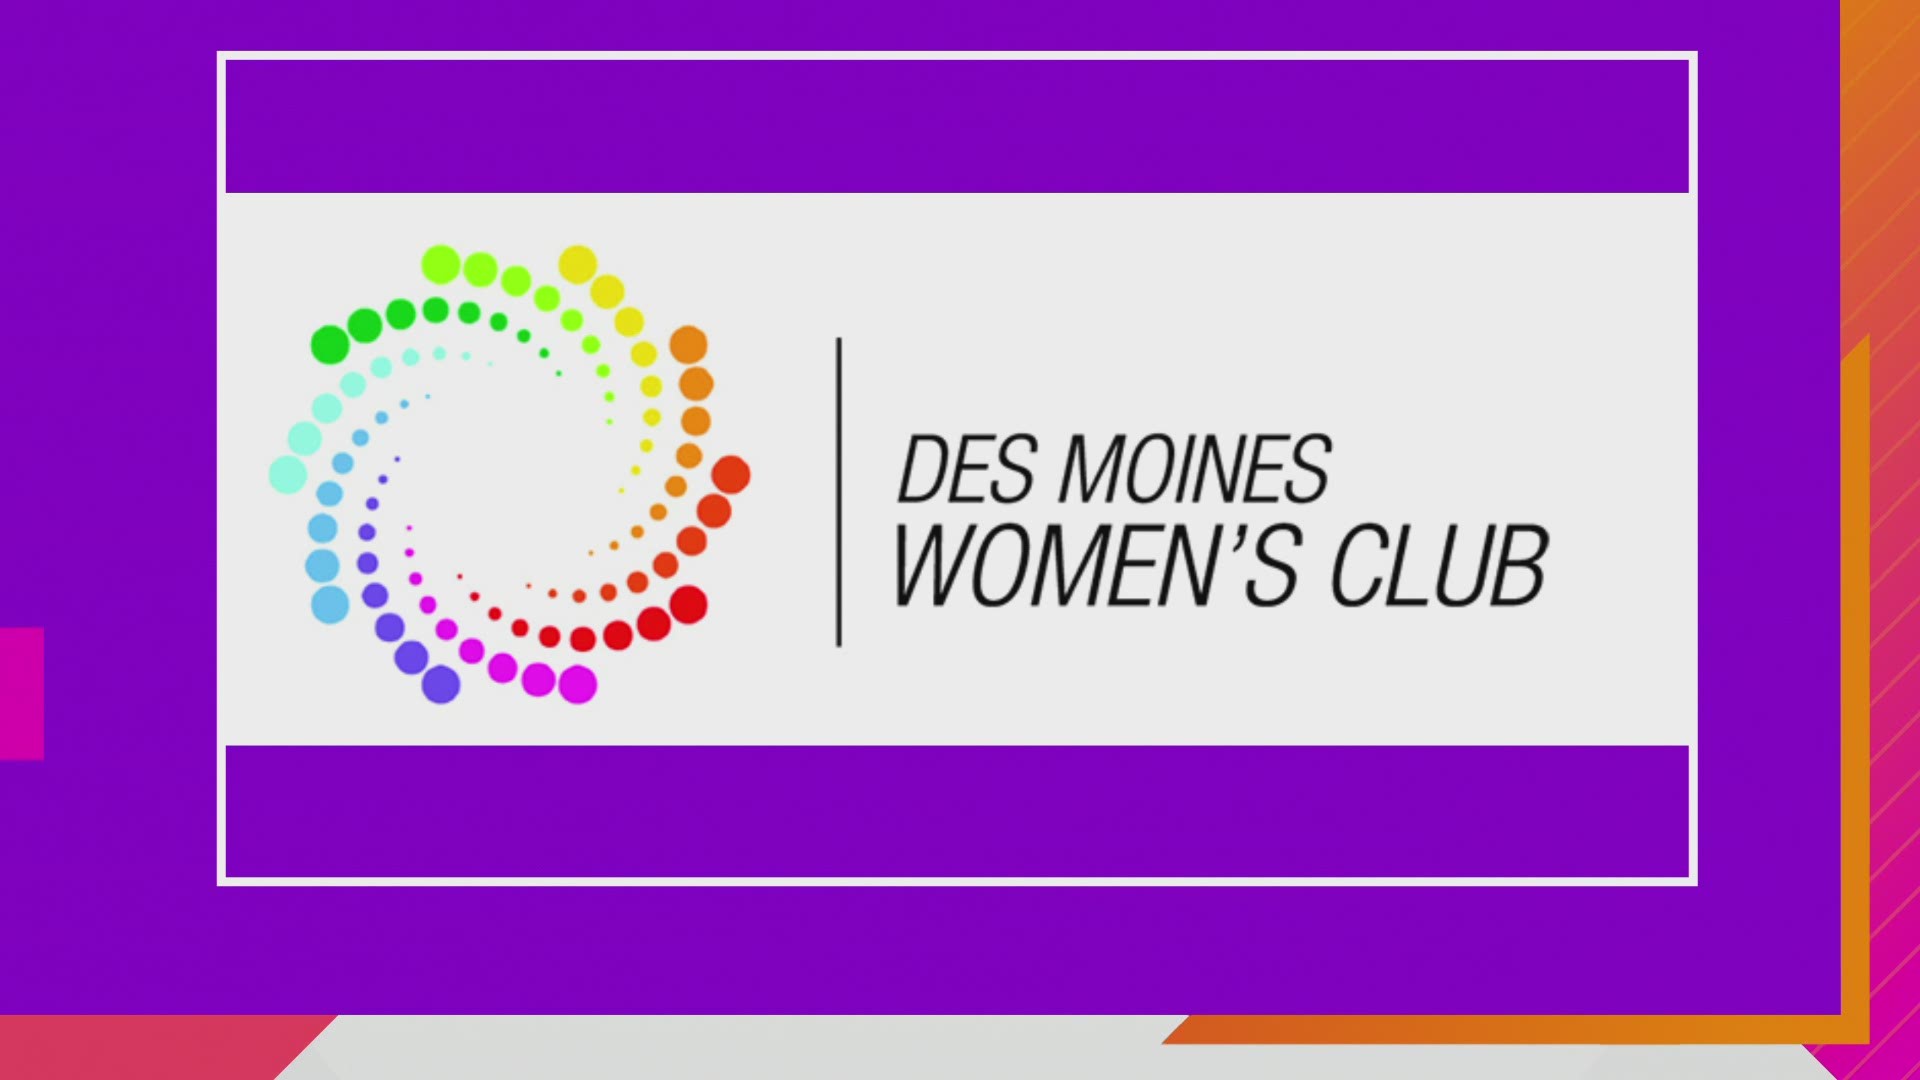 Des Moines Women's Club is offering thousands of dollars in scholarships